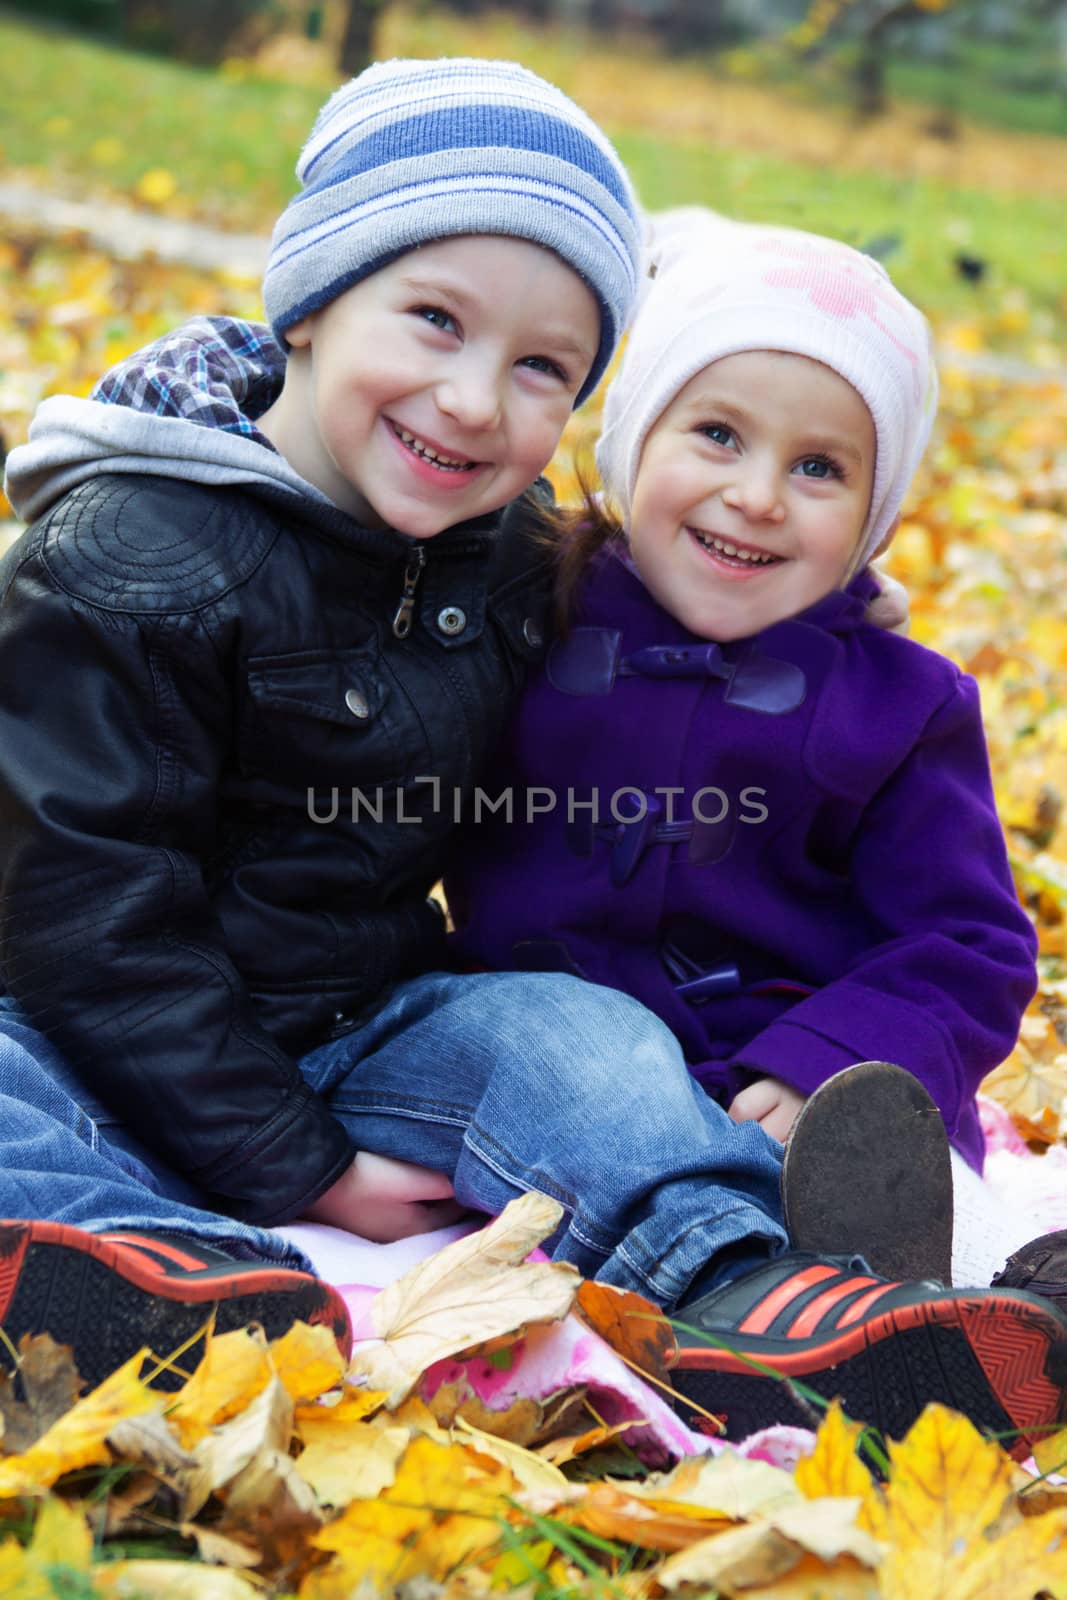 Sister and brother together on autumn leaves by Angel_a